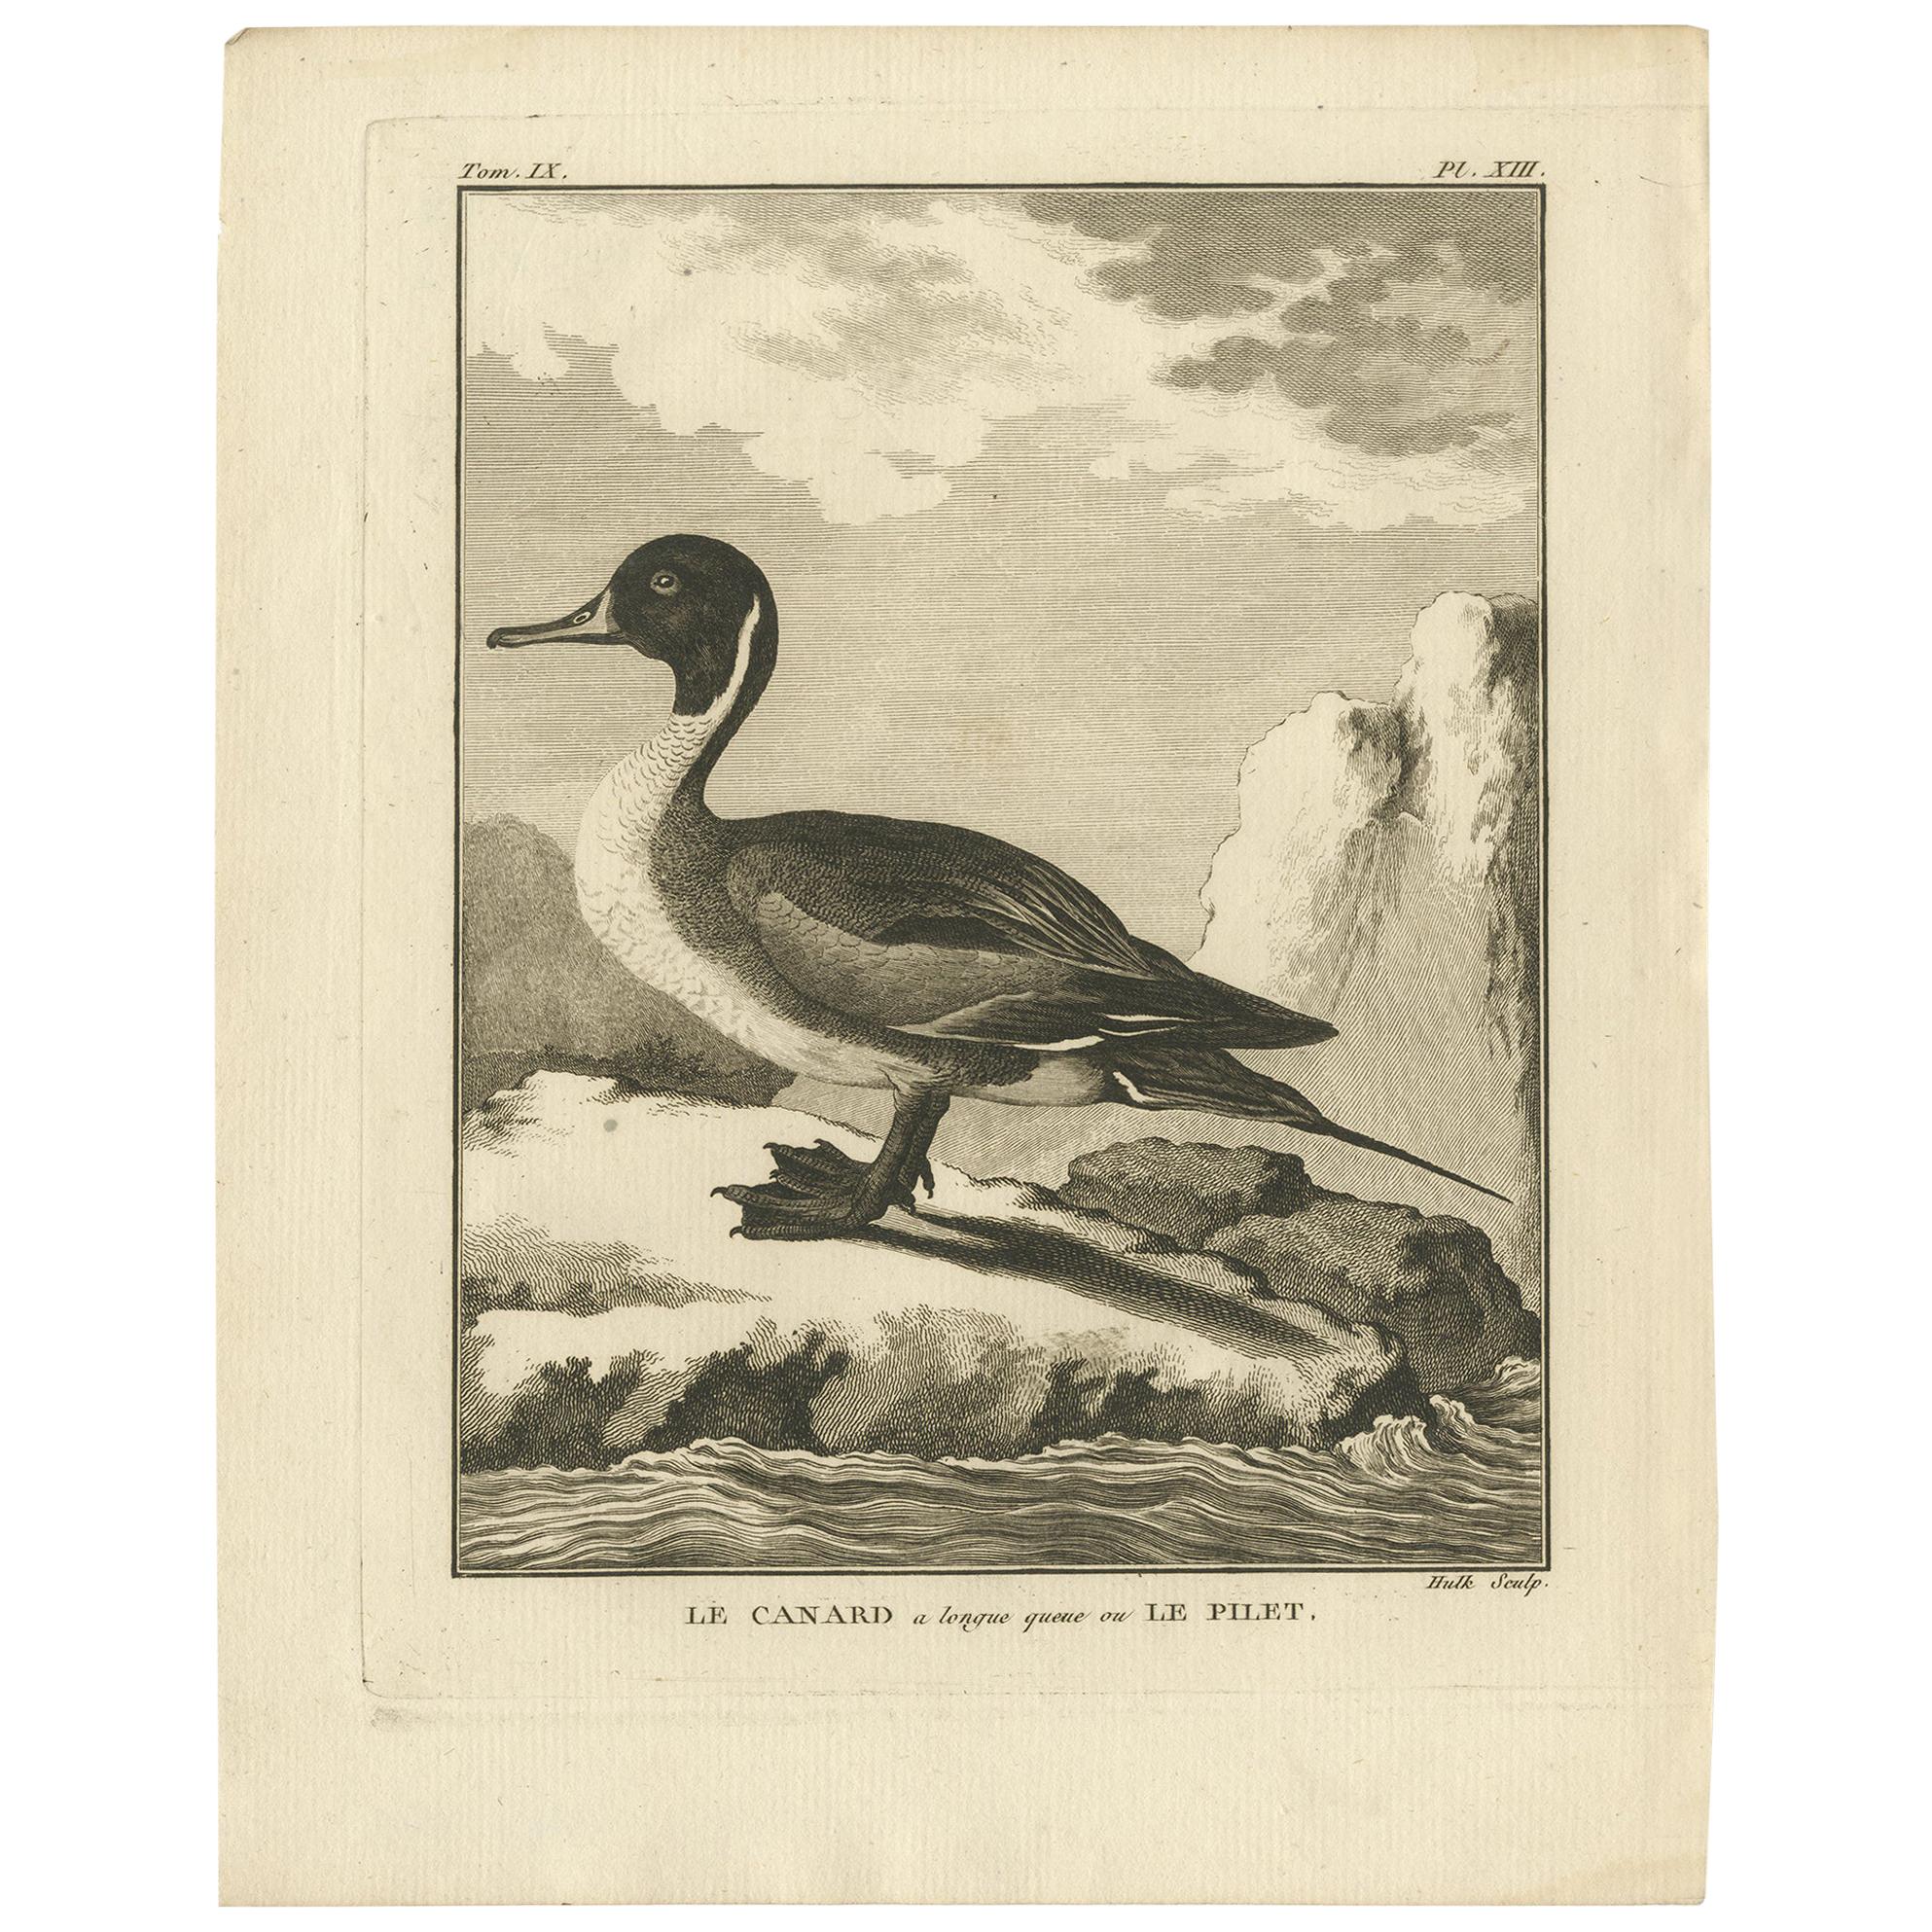 Antique Print of the Pintail Duck by Hulk 'circa 1780'